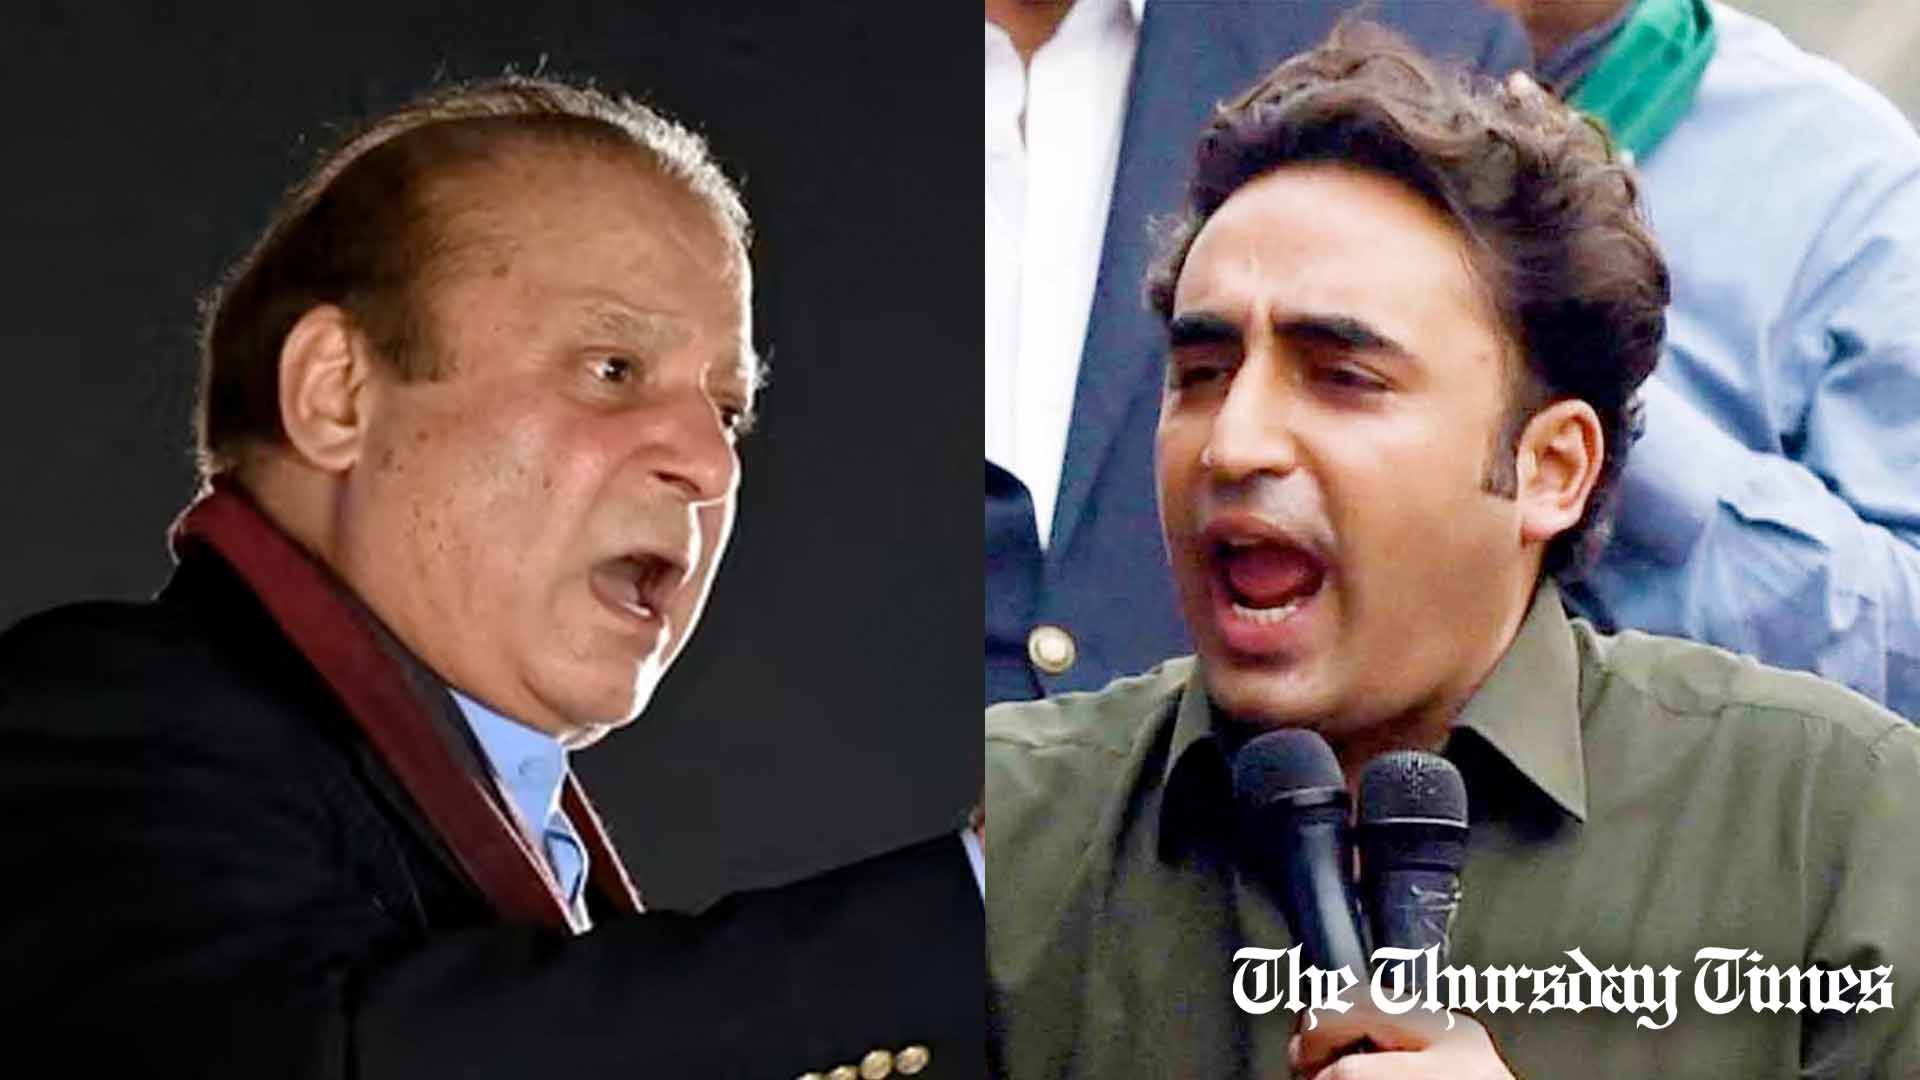 A combined file photo shows PML(N) supremo Nawaz Sharif (L) and PPP chair Bilawal Bhutto-Zardari (R). — FILE/THE THURSDAY TIMES